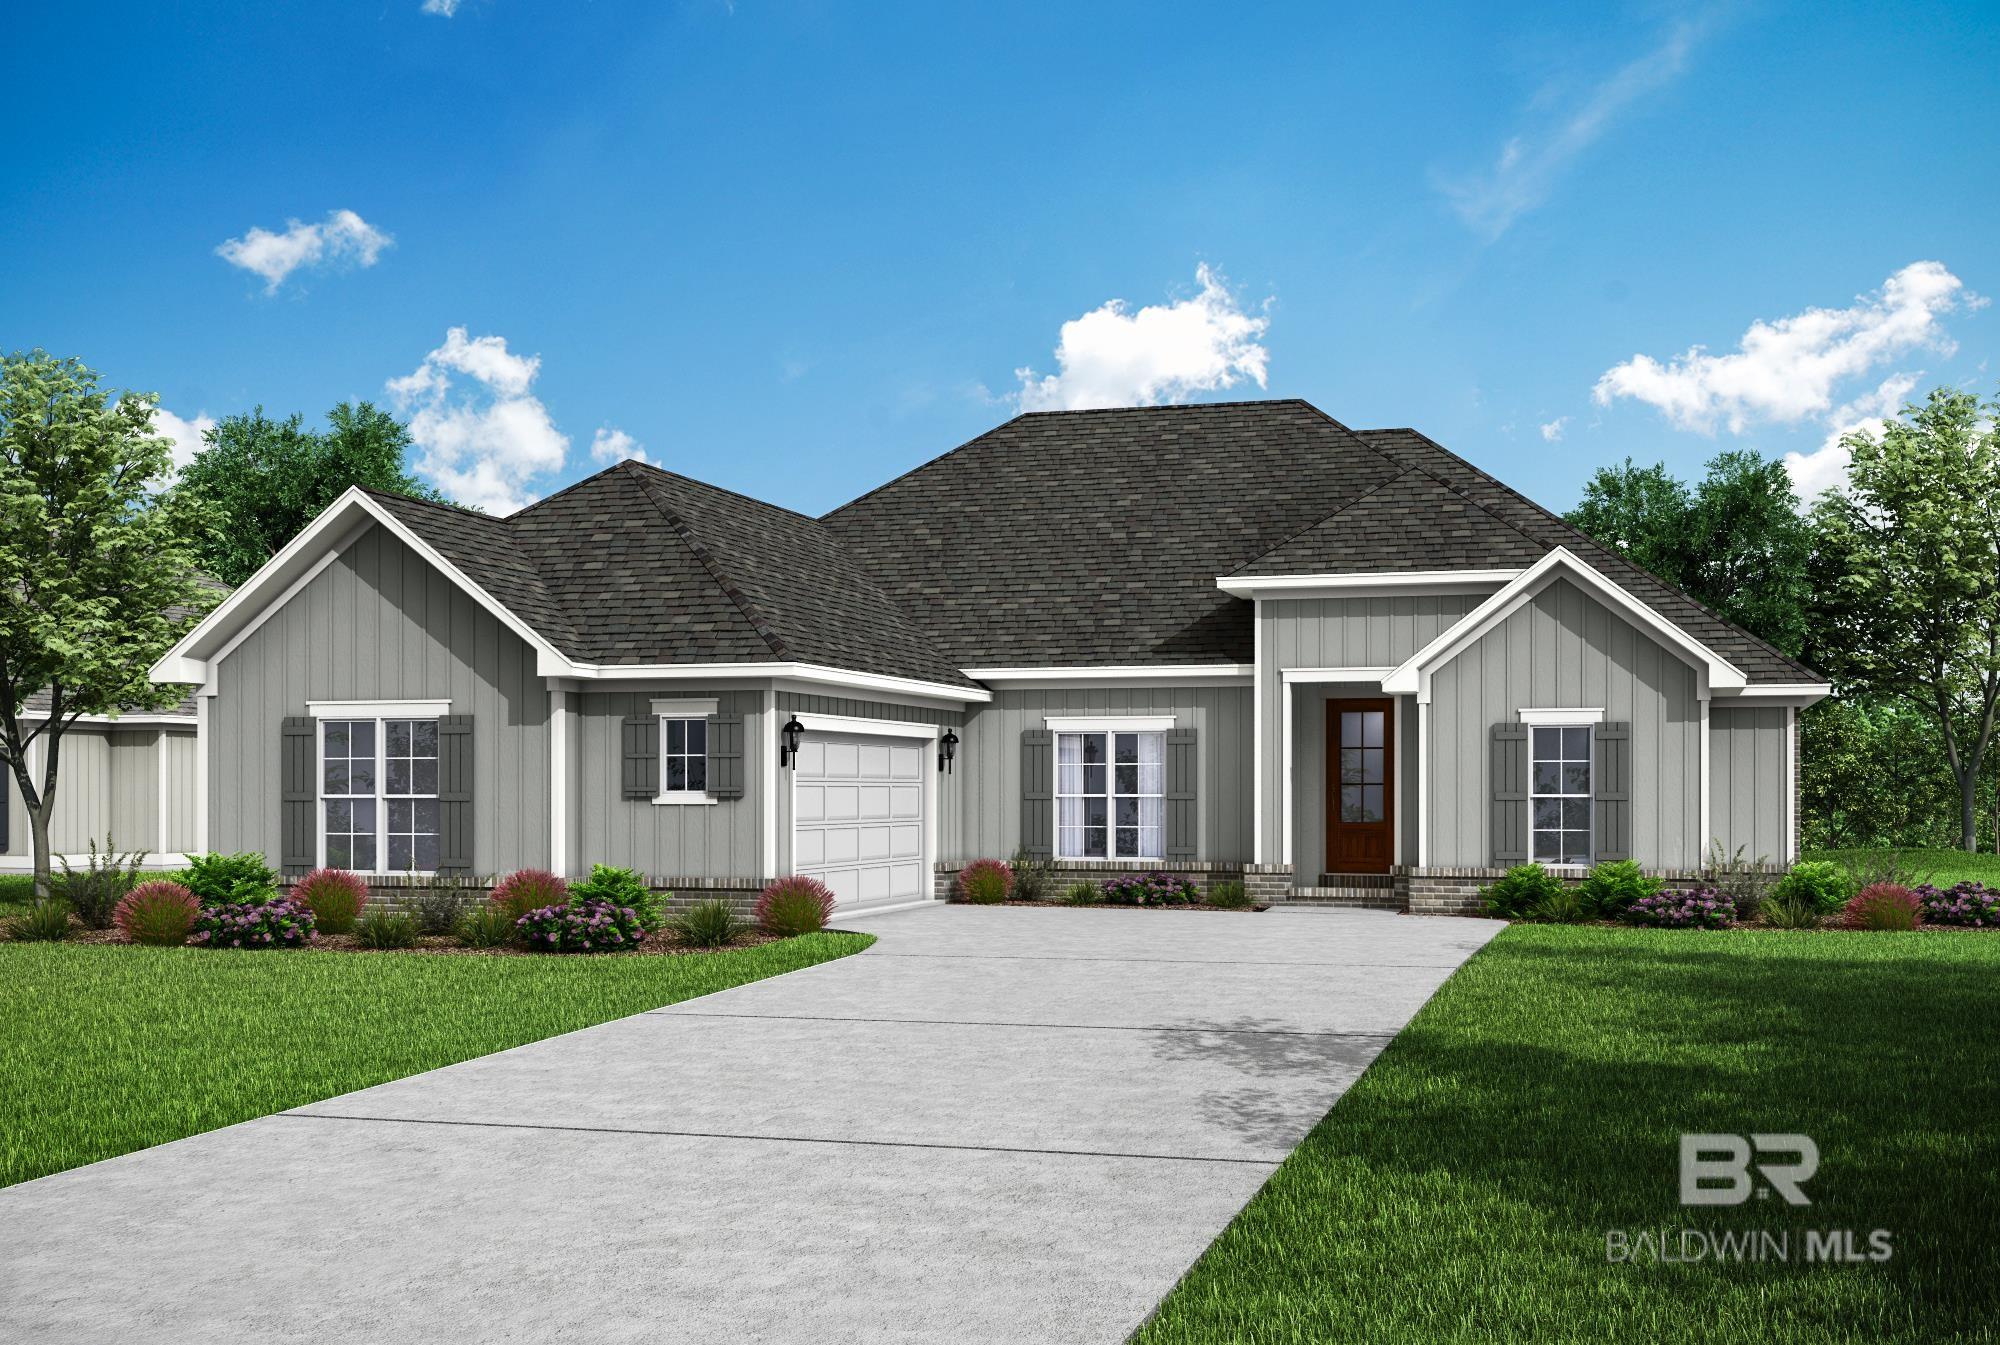 TheTruland ELM floor plan is waiting for you in beautiful French Settlement! Completion 3/2024. Seller will contribute up to $15,000 toward closing costs with preferred lender and/or upgrades when closing by 3/29/24!! Seller preferred lender offers reduced fixed interest rates. A space for every imaginable use, this house exudes luxury and comfort. Enter through the grand 8 foot wood door into the foyer. Open layout allows formal dining room to open to family/great room area and continuously flow into the chef’s kitchen. Gourmet kitchen boasts hardwood flooring, beautiful WHITE cabinetry, gorgeous granite counters, large work island, stainless steel gas range, dishwasher, and built-in wall mounted microwave. The bar overhang is perfect for entertaining and can easily seat guests with chairs or barstools. Convenient breakfast nook off the kitchen includes access to the large rear covered patio. Owners quarters boasts hardwood flooring and includes a spa-like lavish primary bathroom with beautiful soaking garden tub, frameless glass shower door, double vanities, tiled shower, linen closet and separate water closet. Enjoy huge primary closet, utilized by sturdy wood shelving. Floor plan showcases true“split” layout as two guest bedrooms and jack-and-jill style bath are on the opposing side of the home as the primary. Large laundry room with a freestanding sink and convenient “drop-zone” by door leading to garage. Call today for a tour of this home.  This home is situated in the Frech Settlement subdivision, just minutes from shopping, restaurants, and I-10! Enjoy many amenities in this community including pool and clubhouse. This Energy efficient home includes thermal doors, Energy Star rated double pane windows, and 14 SEER Carrier Heat Pump. A 1-year builder's warranty and 10-year structural warranty are included.  ***Pictures are of similar home and not necessarily of subject property, including interior and exterior colors, options, and finishes.